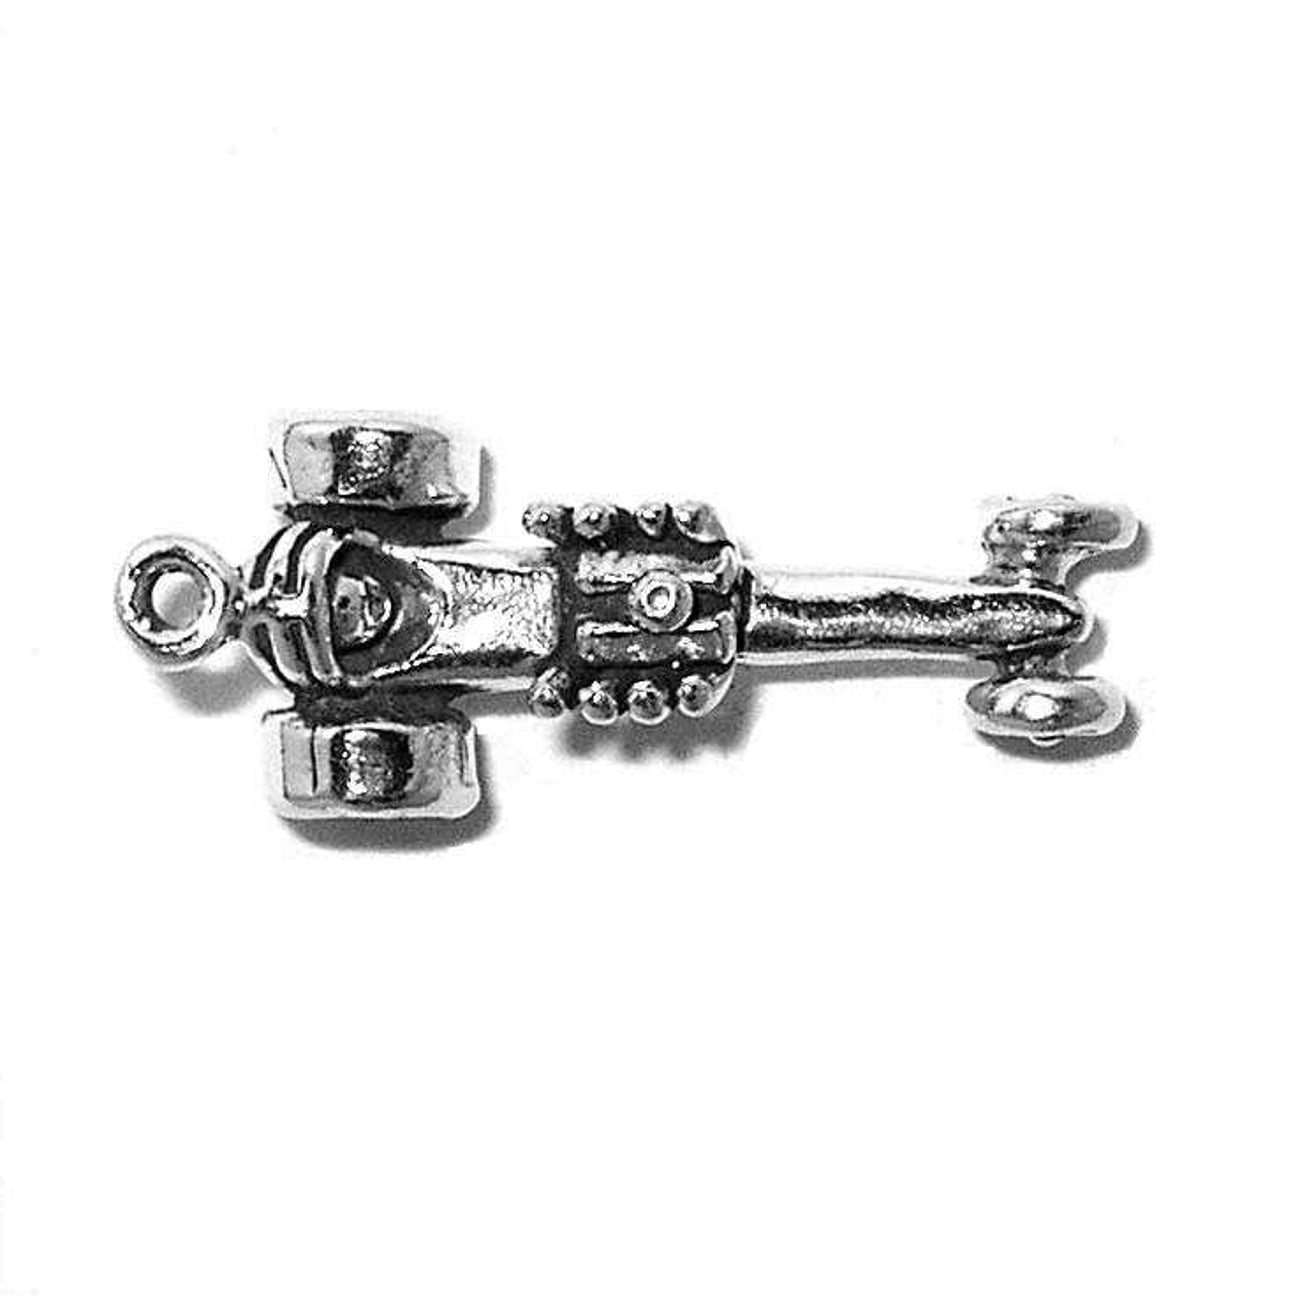 Sterling Silver 7 4.5mm Charm Bracelet With Attached 3D Top Fuel Hot Rod Dragster Racing Car Charm